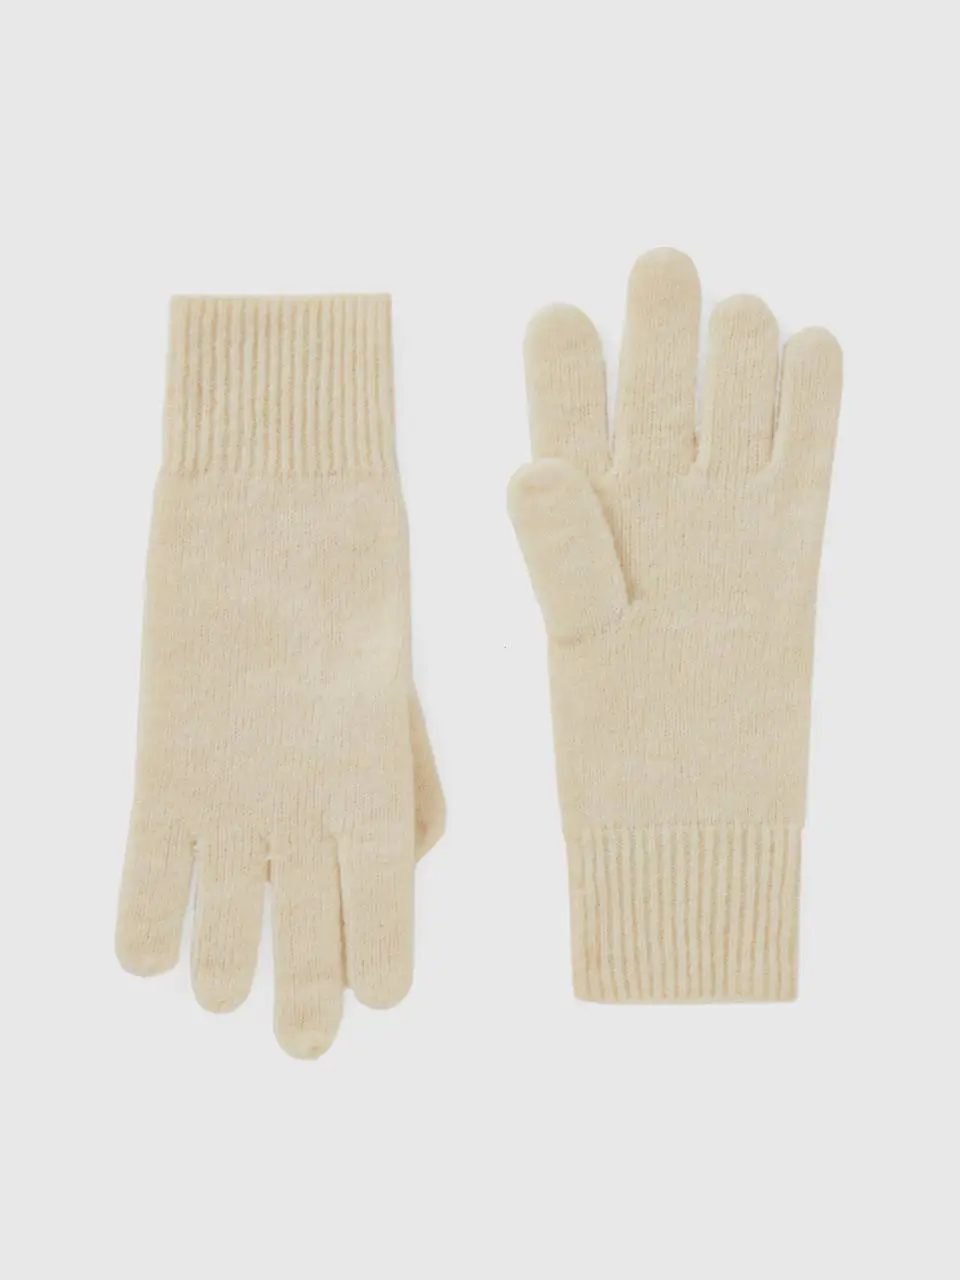 Benetton gloves in recycled yarn. 1